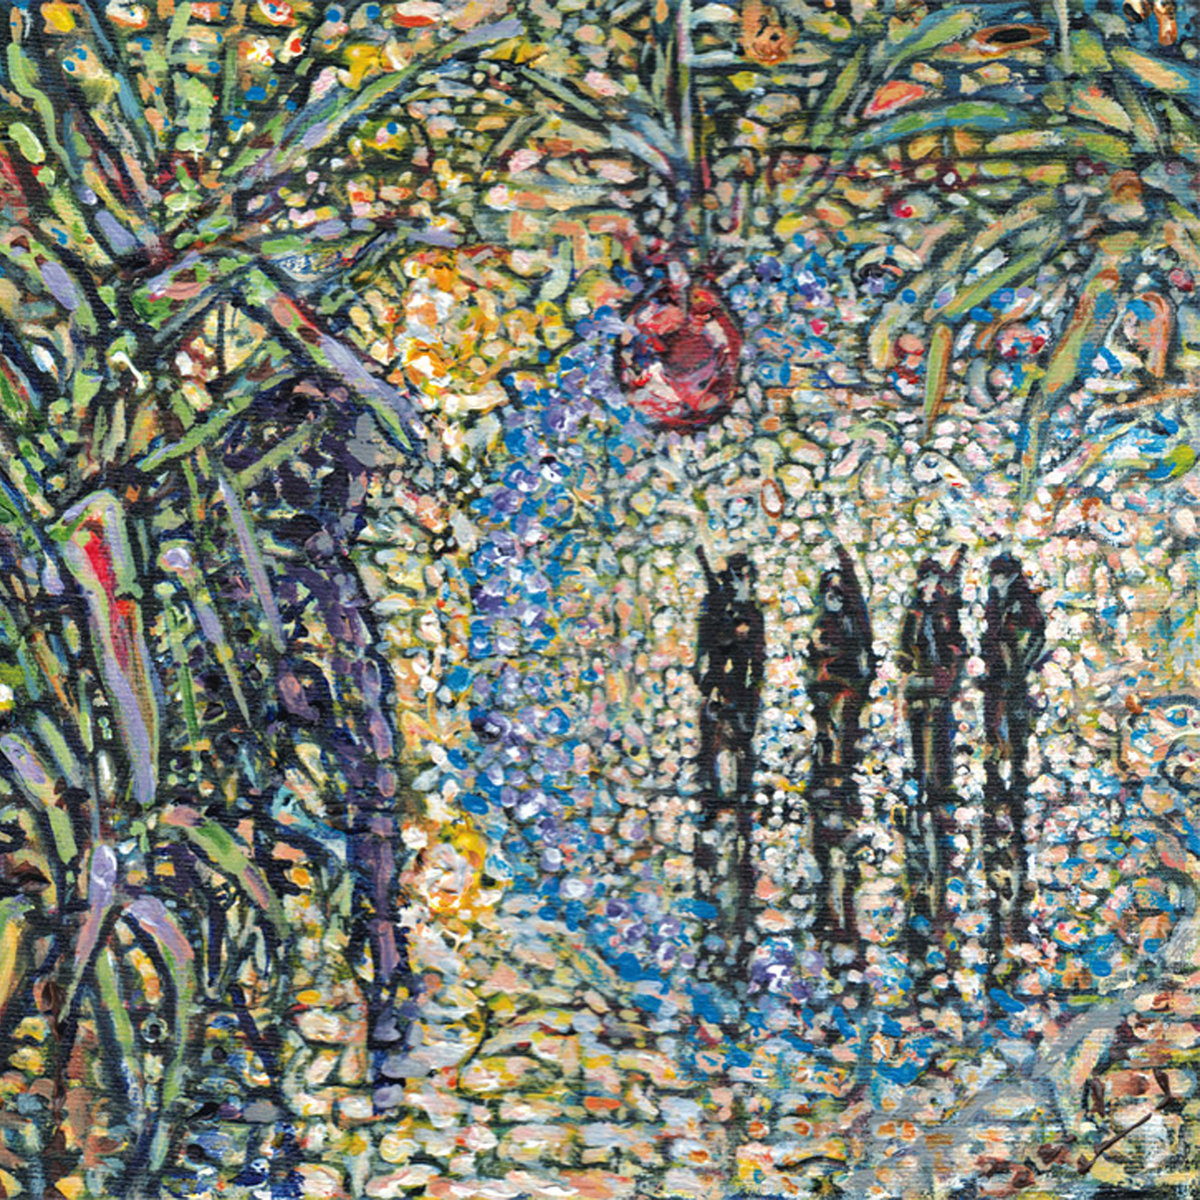 After the Flood - mosaic image of a band performing